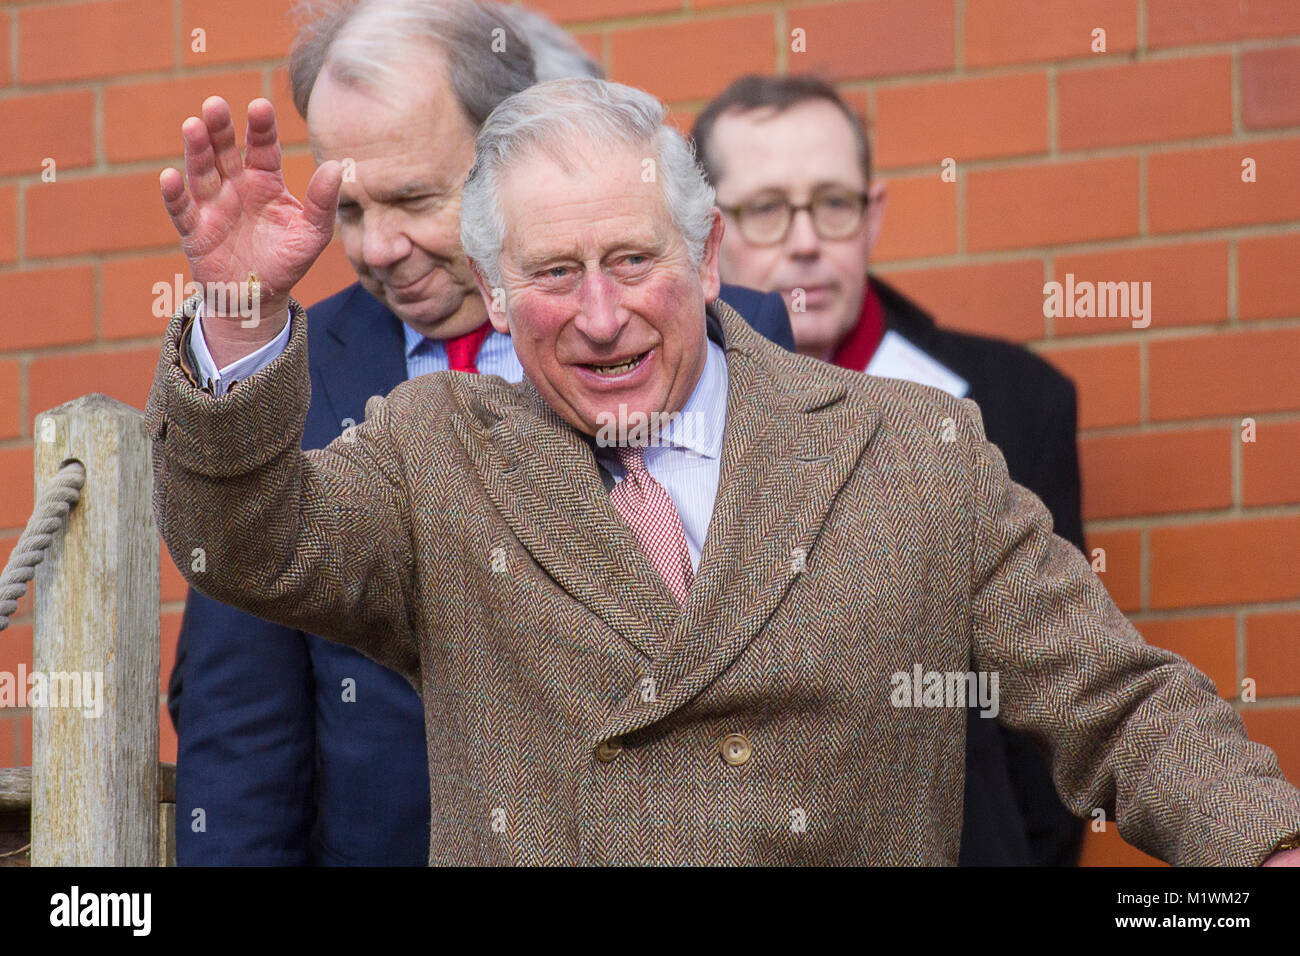 Stroud, Gloucestershire, UK. 2nd February, 2018. HRH The Prince of Wales waves to spectators at Wallbridge Lock, Stroud, UK. Prince Charles visited to officially open the newly restored Wallbridge Lower Lock, part of the Cotswold Canals Project. Picture: Carl Hewlett/Alamy Live News Stock Photo